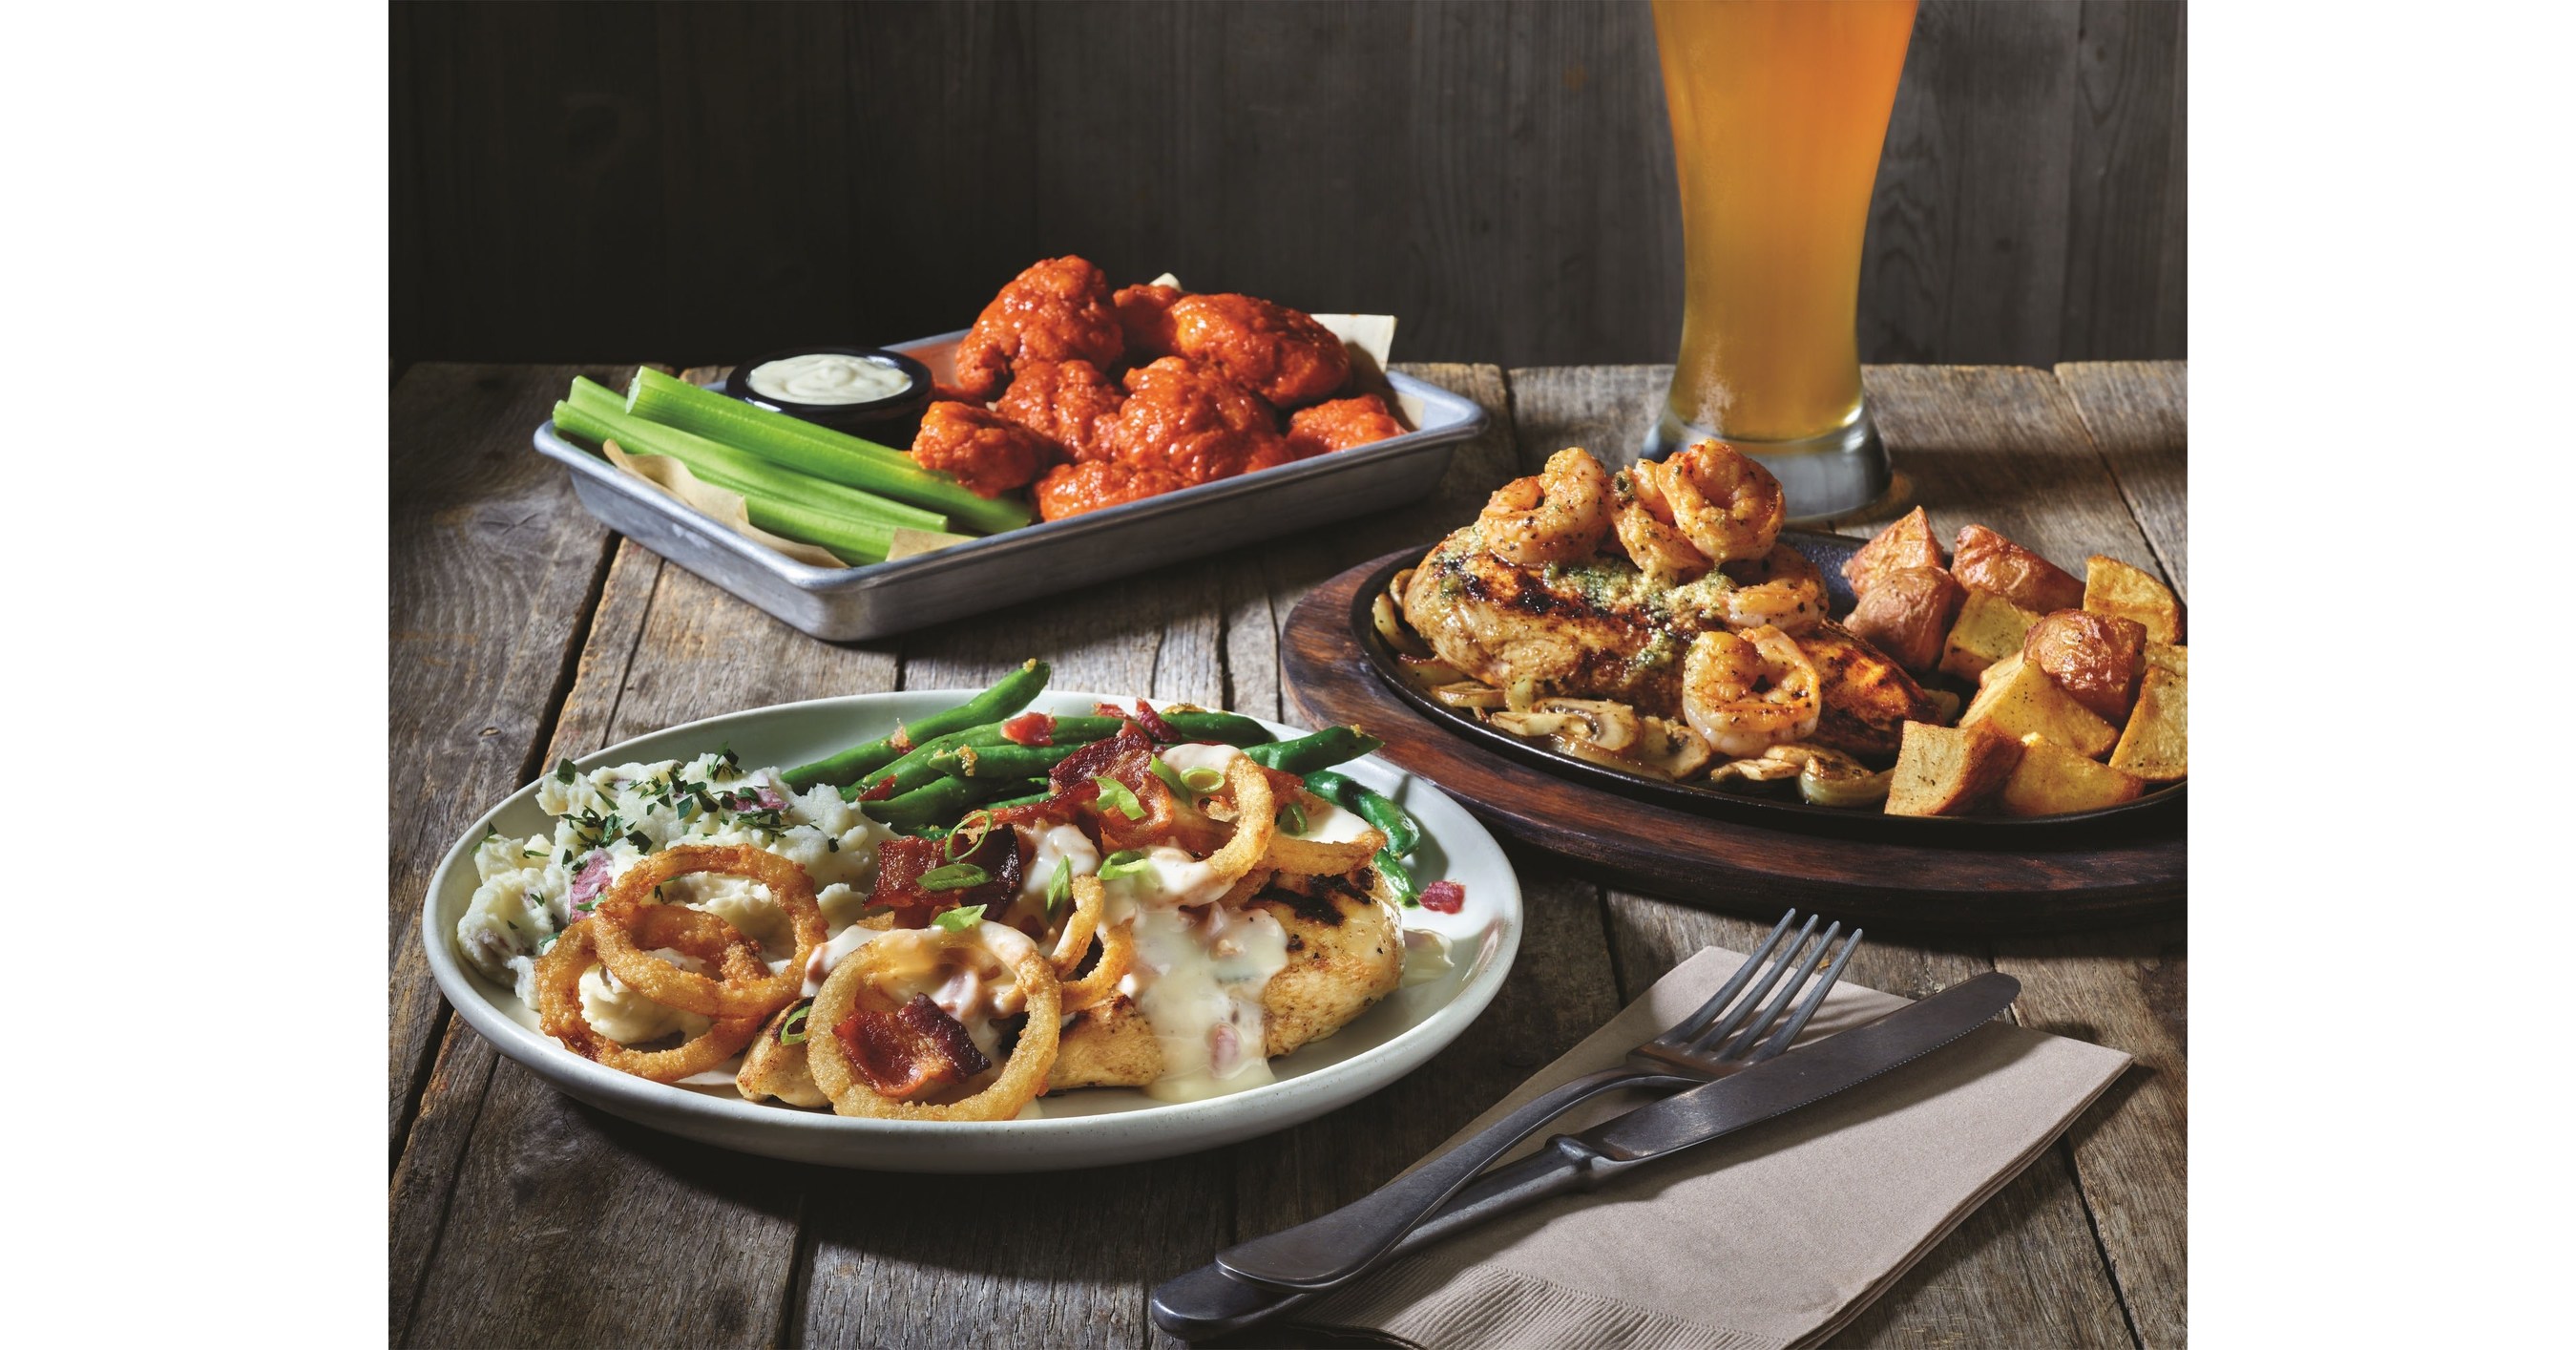 Applebee's® Gives You More for Your Money with New 2 for 20 Value Menu